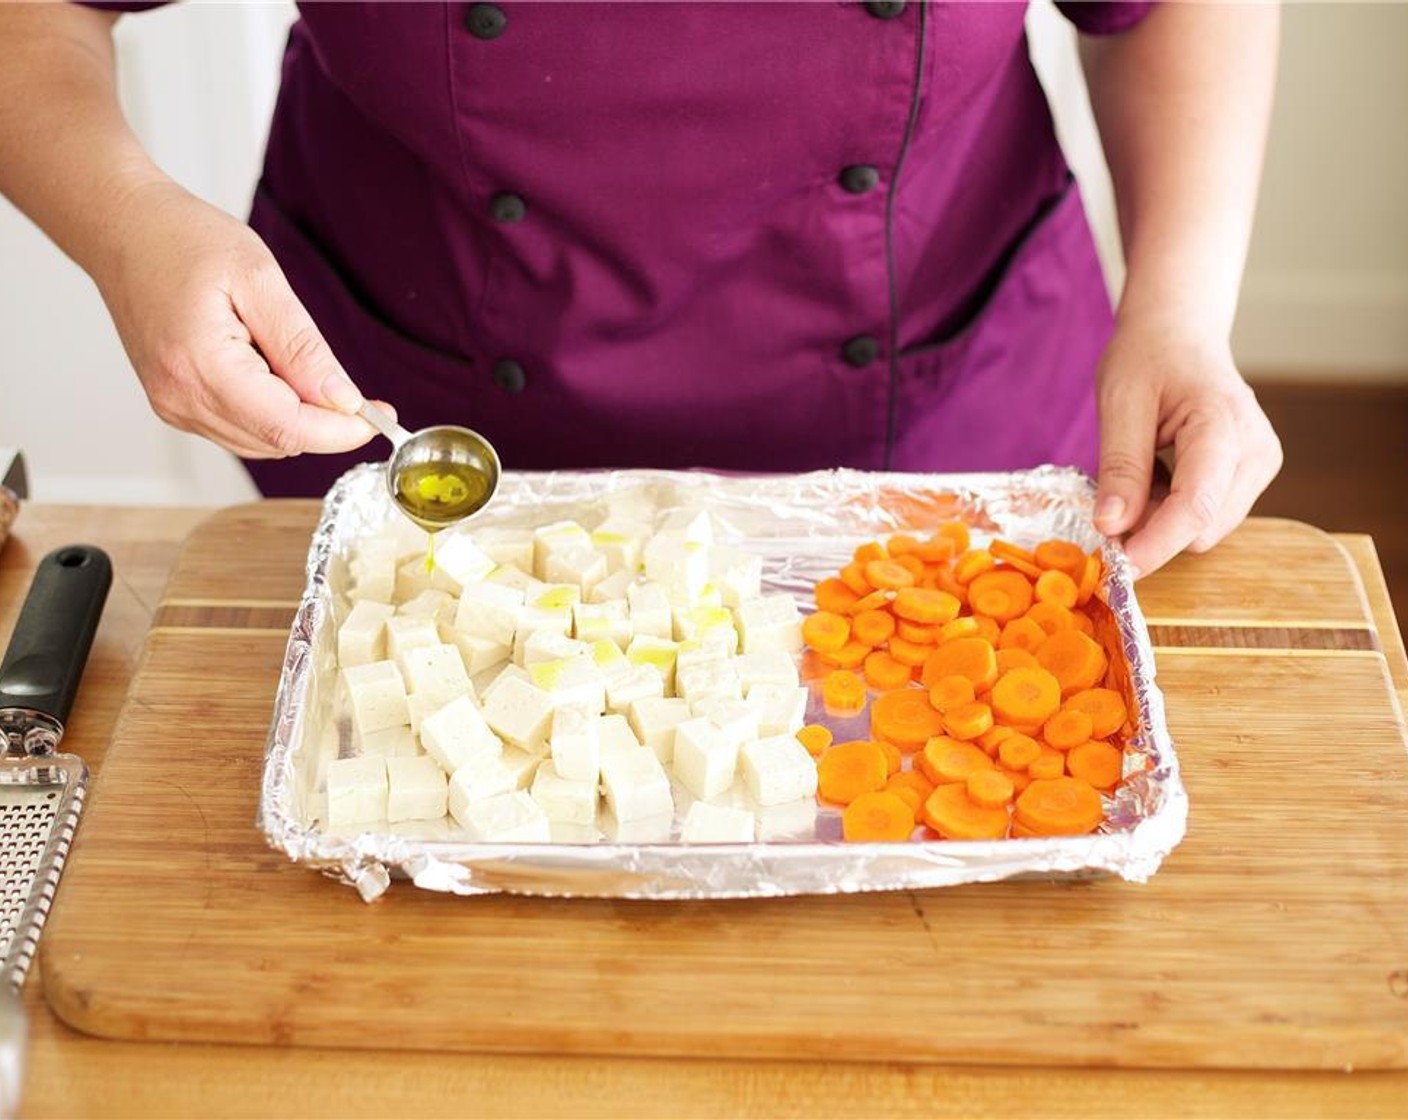 step 3 Season tofu and carrots with Olive Oil (1 Tbsp) and Salt (1 tsp). Toss evenly and lay carrots and tofu in a single layer. Roast in the oven for sixteen minutes until carrots are just tender and tofu is slightly golden. Remove from oven and hold.